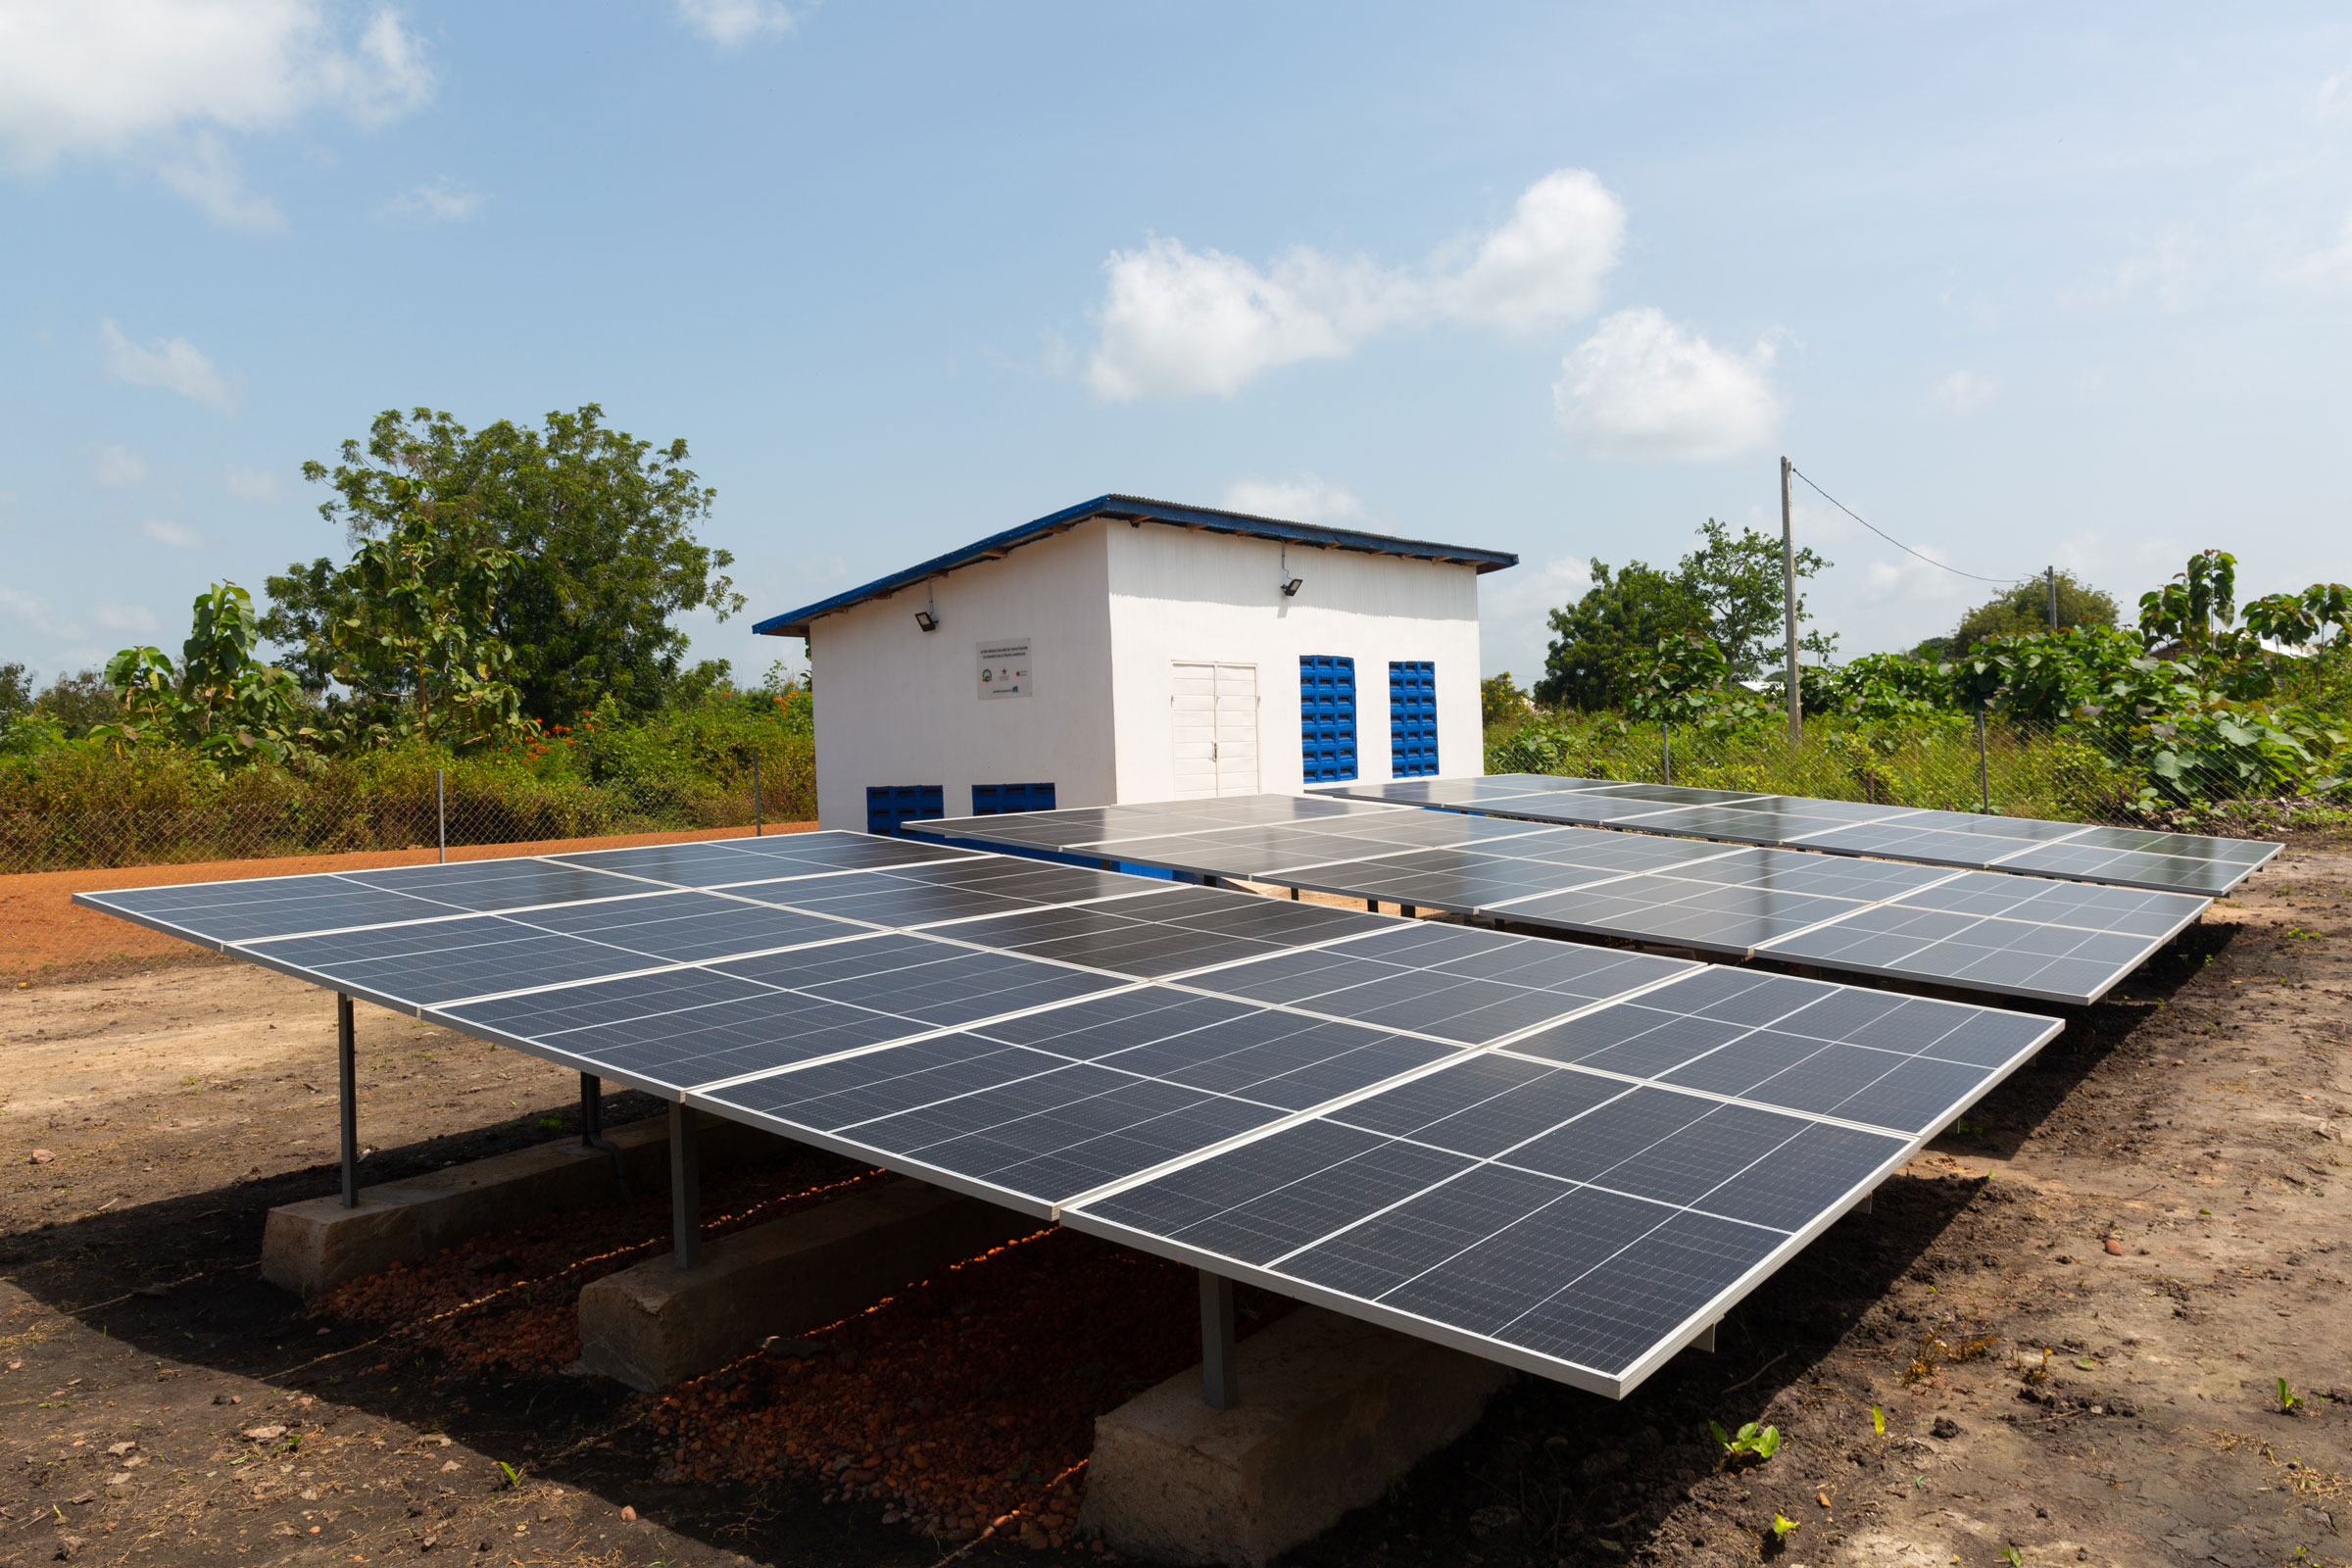 Takpatchiome Village's new solar mini-grid system